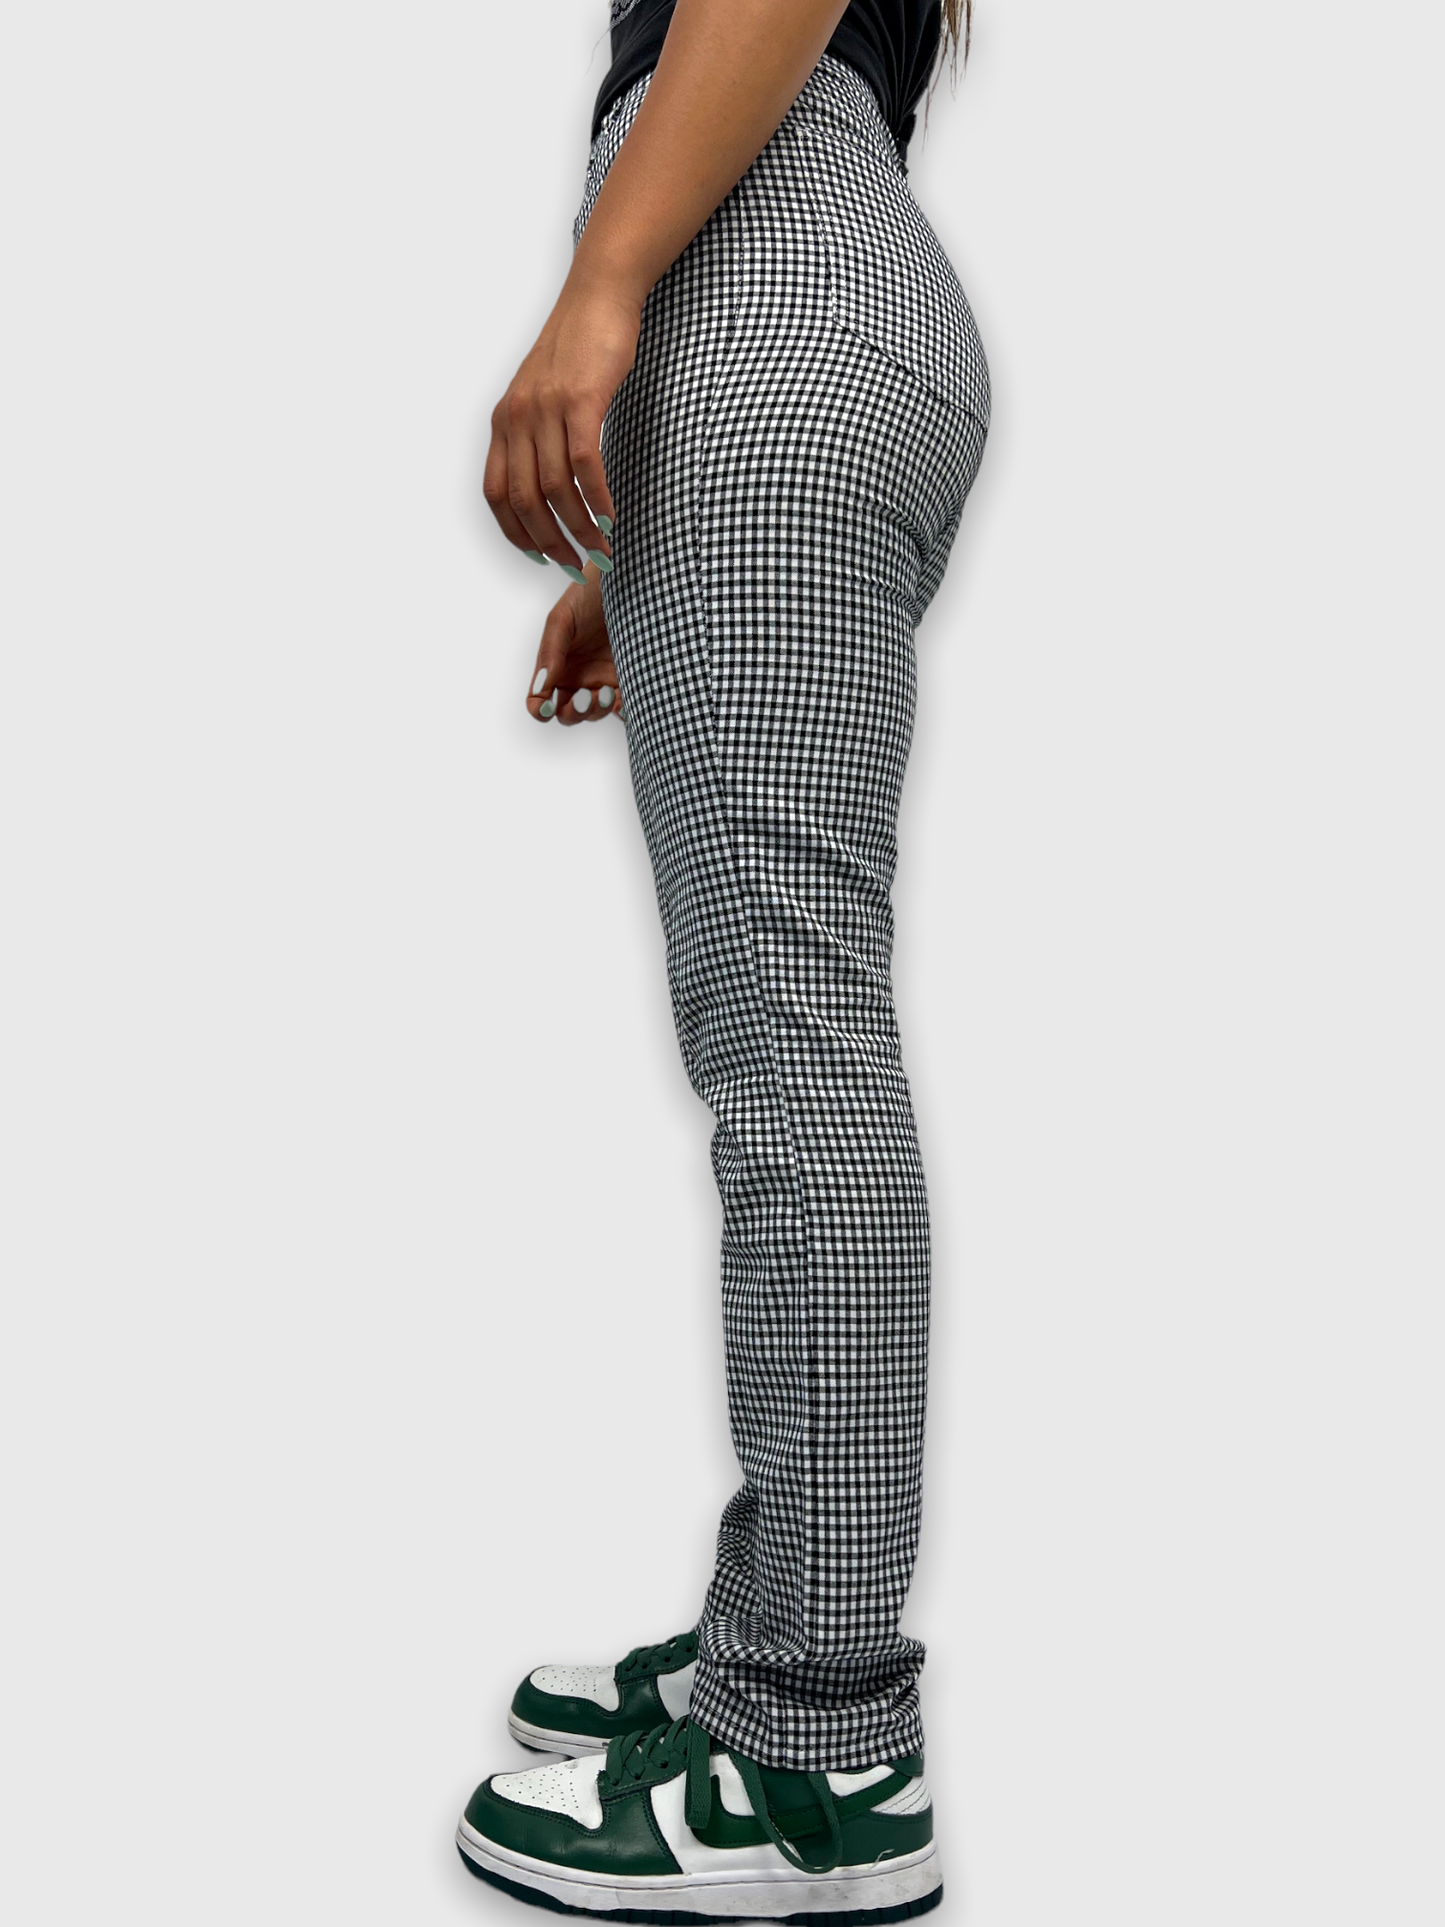 90's Checkered Vintage Pants Size 6